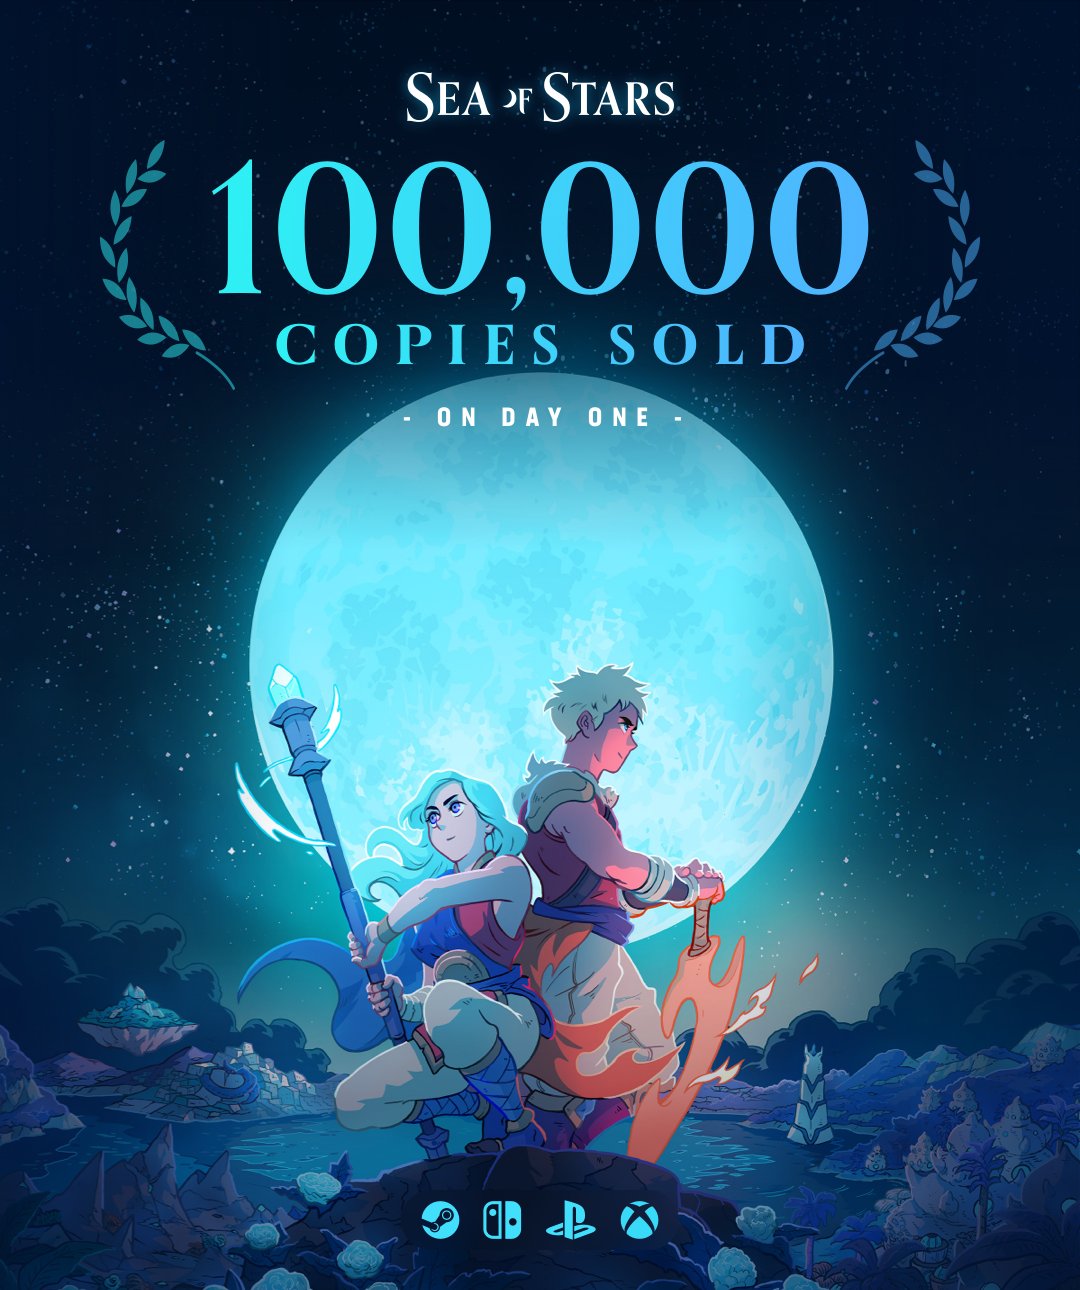 Okami Games on X: Sea of Stars has sold 100,000 copies in its first 24  hours. From Kickstarter to Metacritic Must-Play - and now over 100K units  sold day one. Pretty awesome.